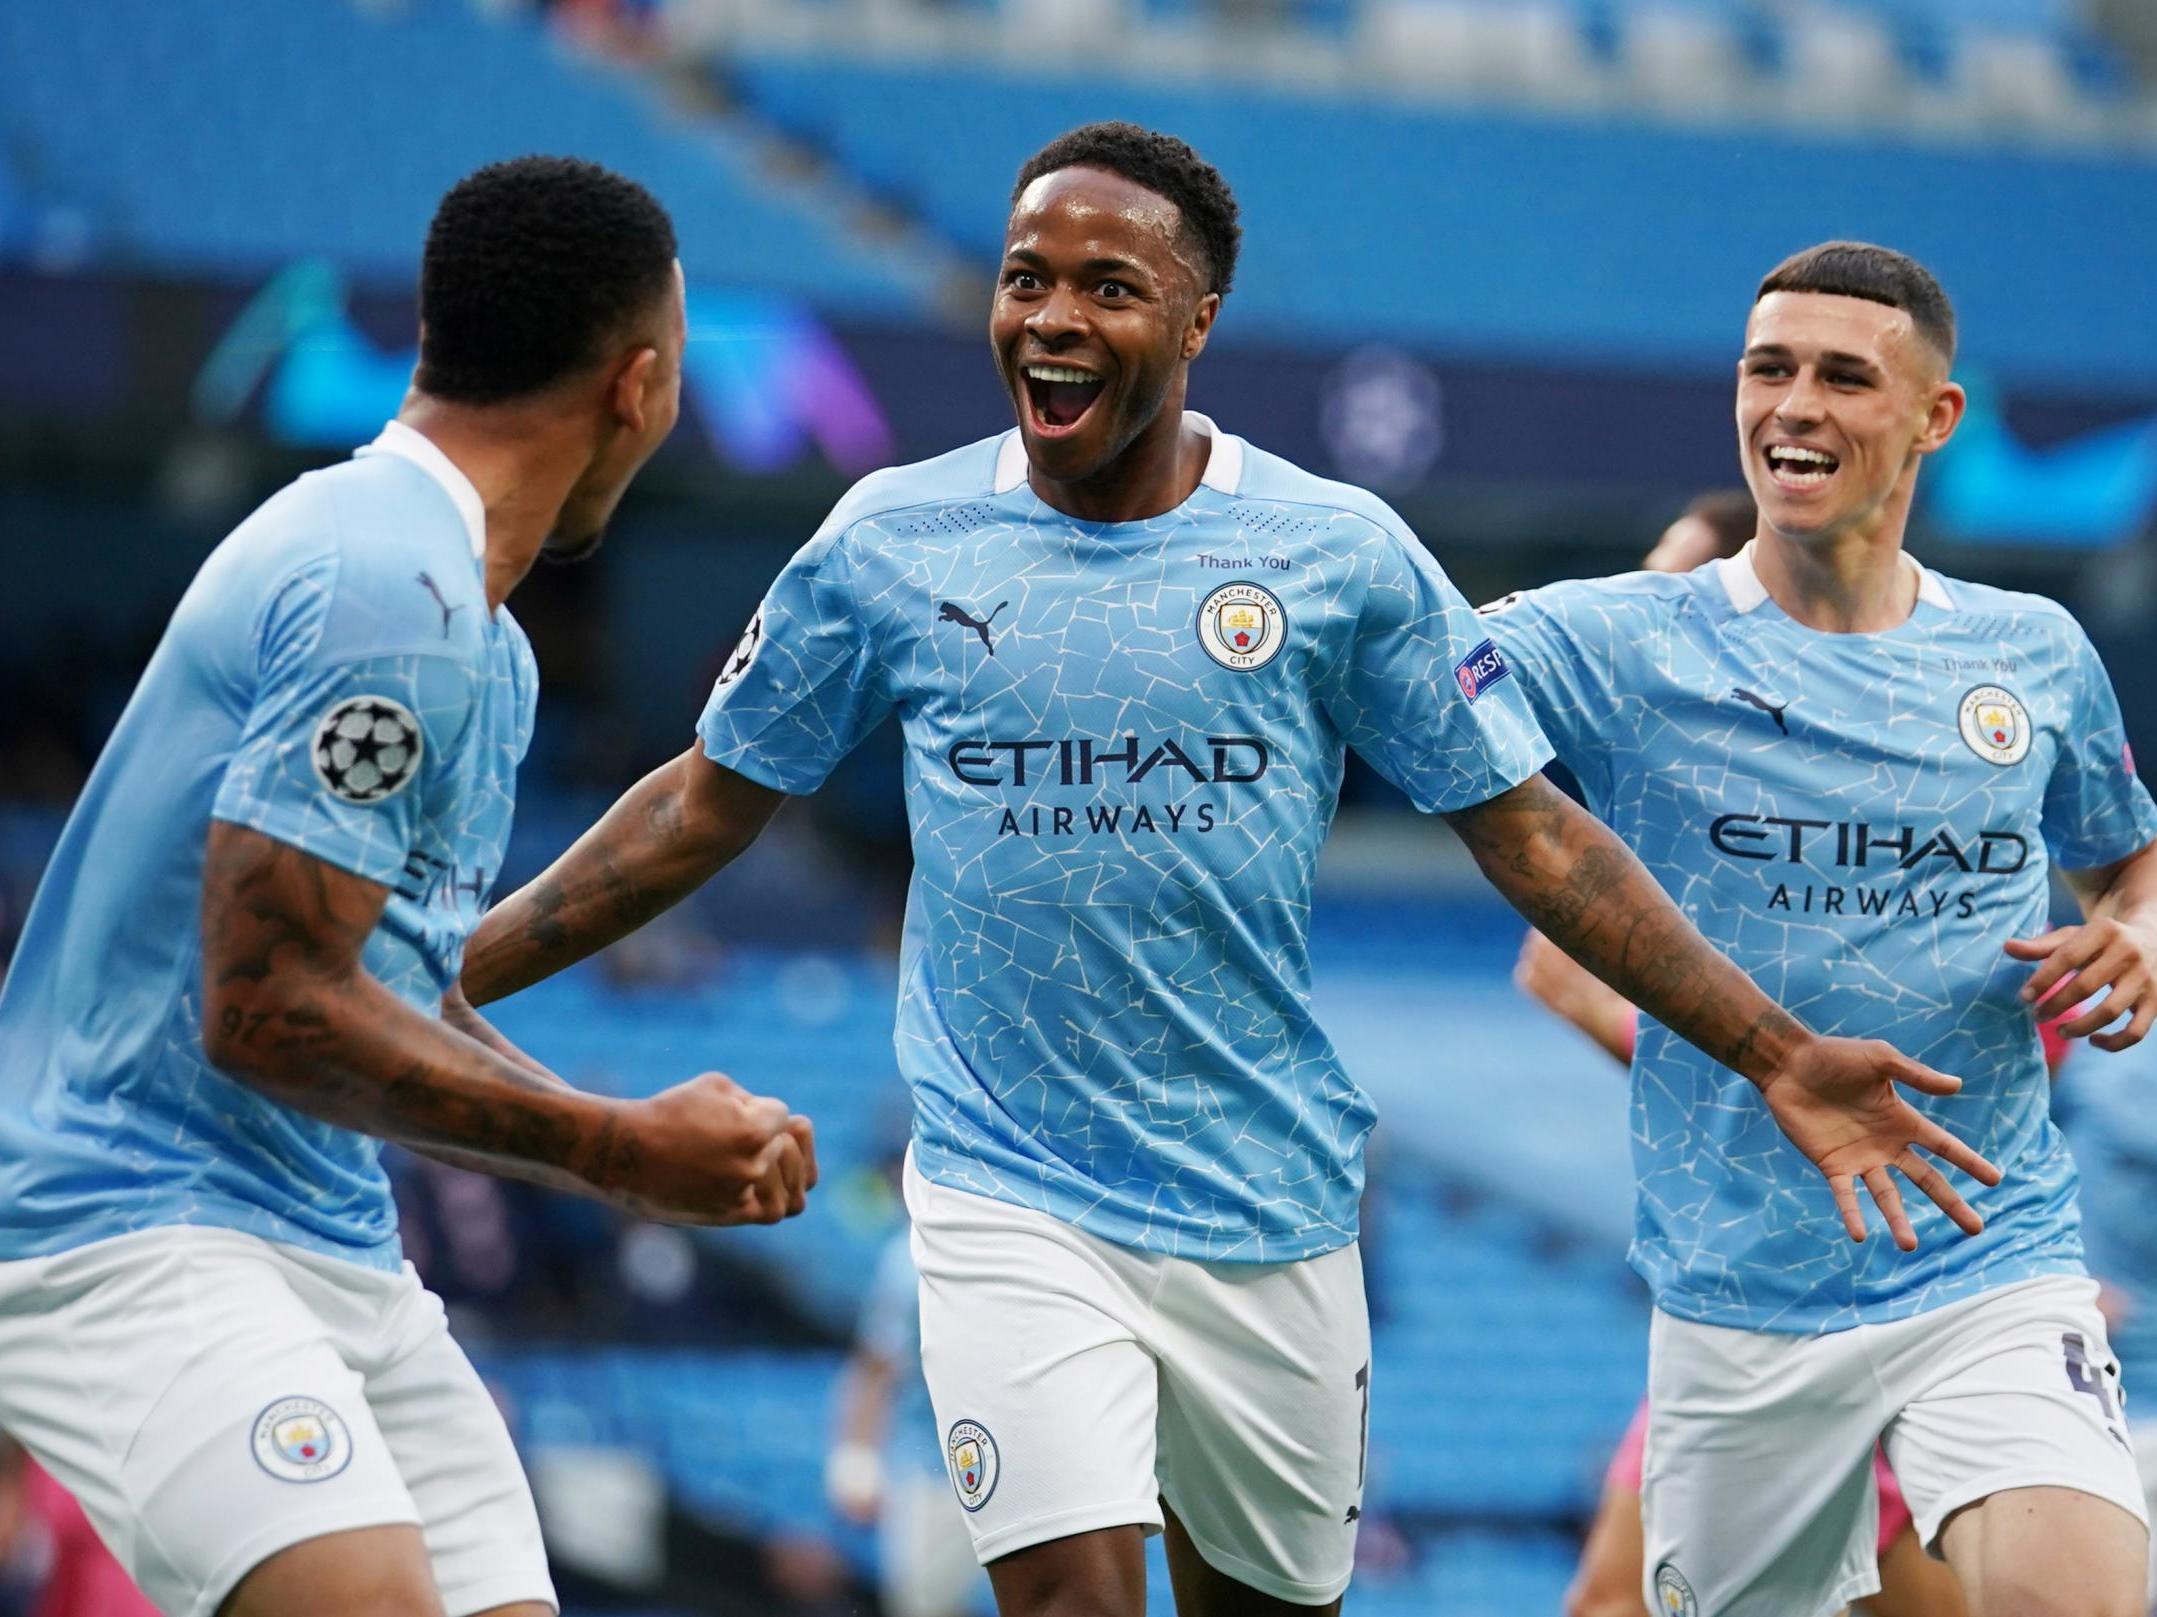 Raheem Sterling pinpoints Man City's hard work and energy as key to Real Madrid victory